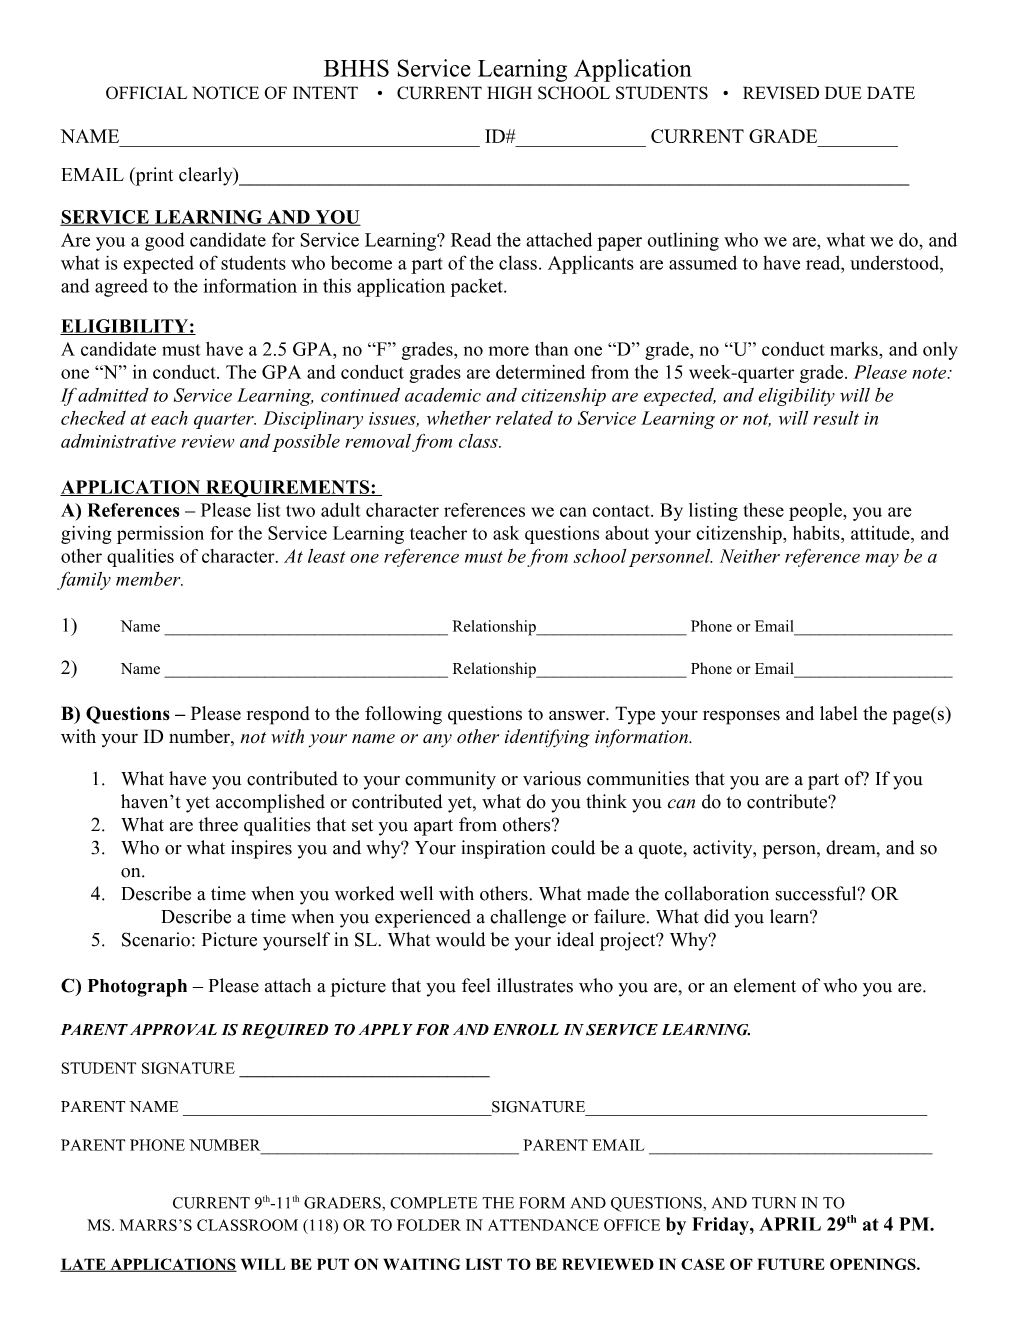 BHHS Service Learning Application